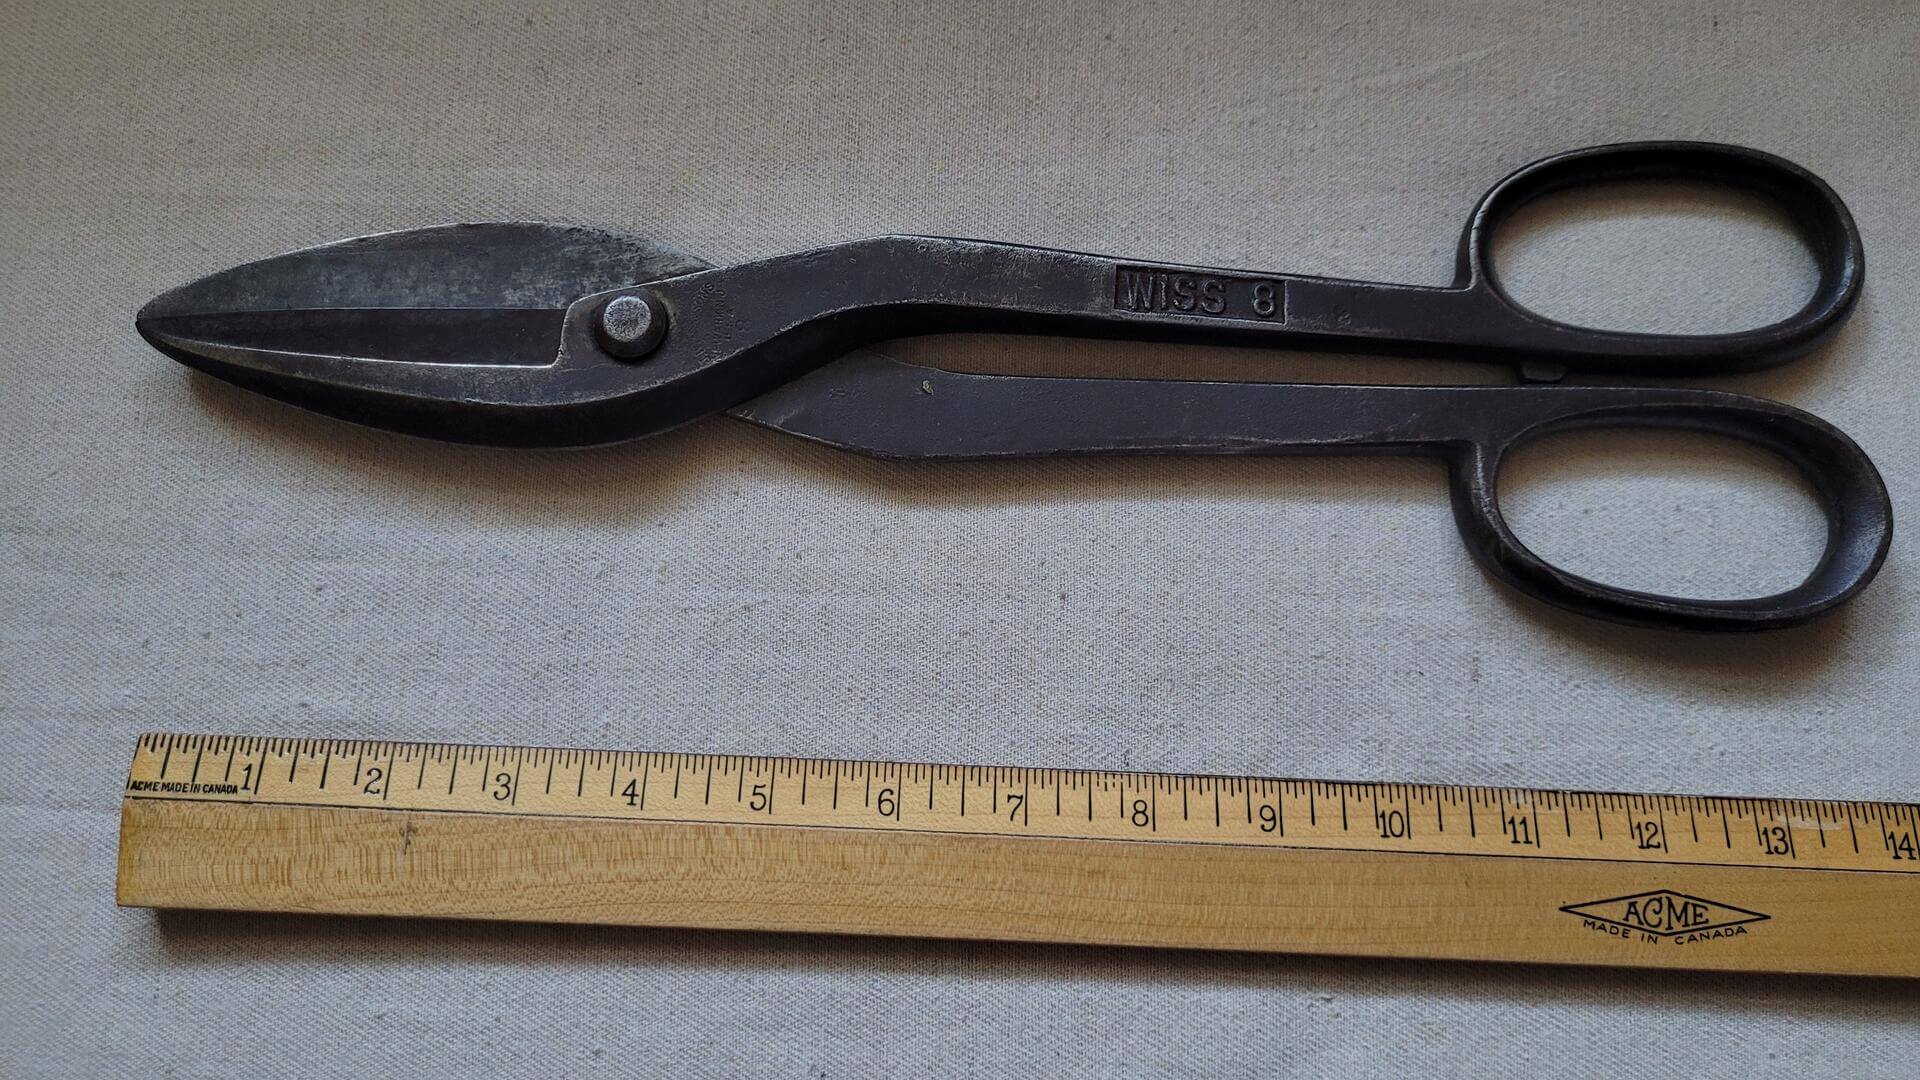 Vintage heavy duty No 8 forged steel 14 inch shears and tin snips by J. Wiss & Sons Newark NJ. Antique made in USA collectible sheet metal quality cutting tools